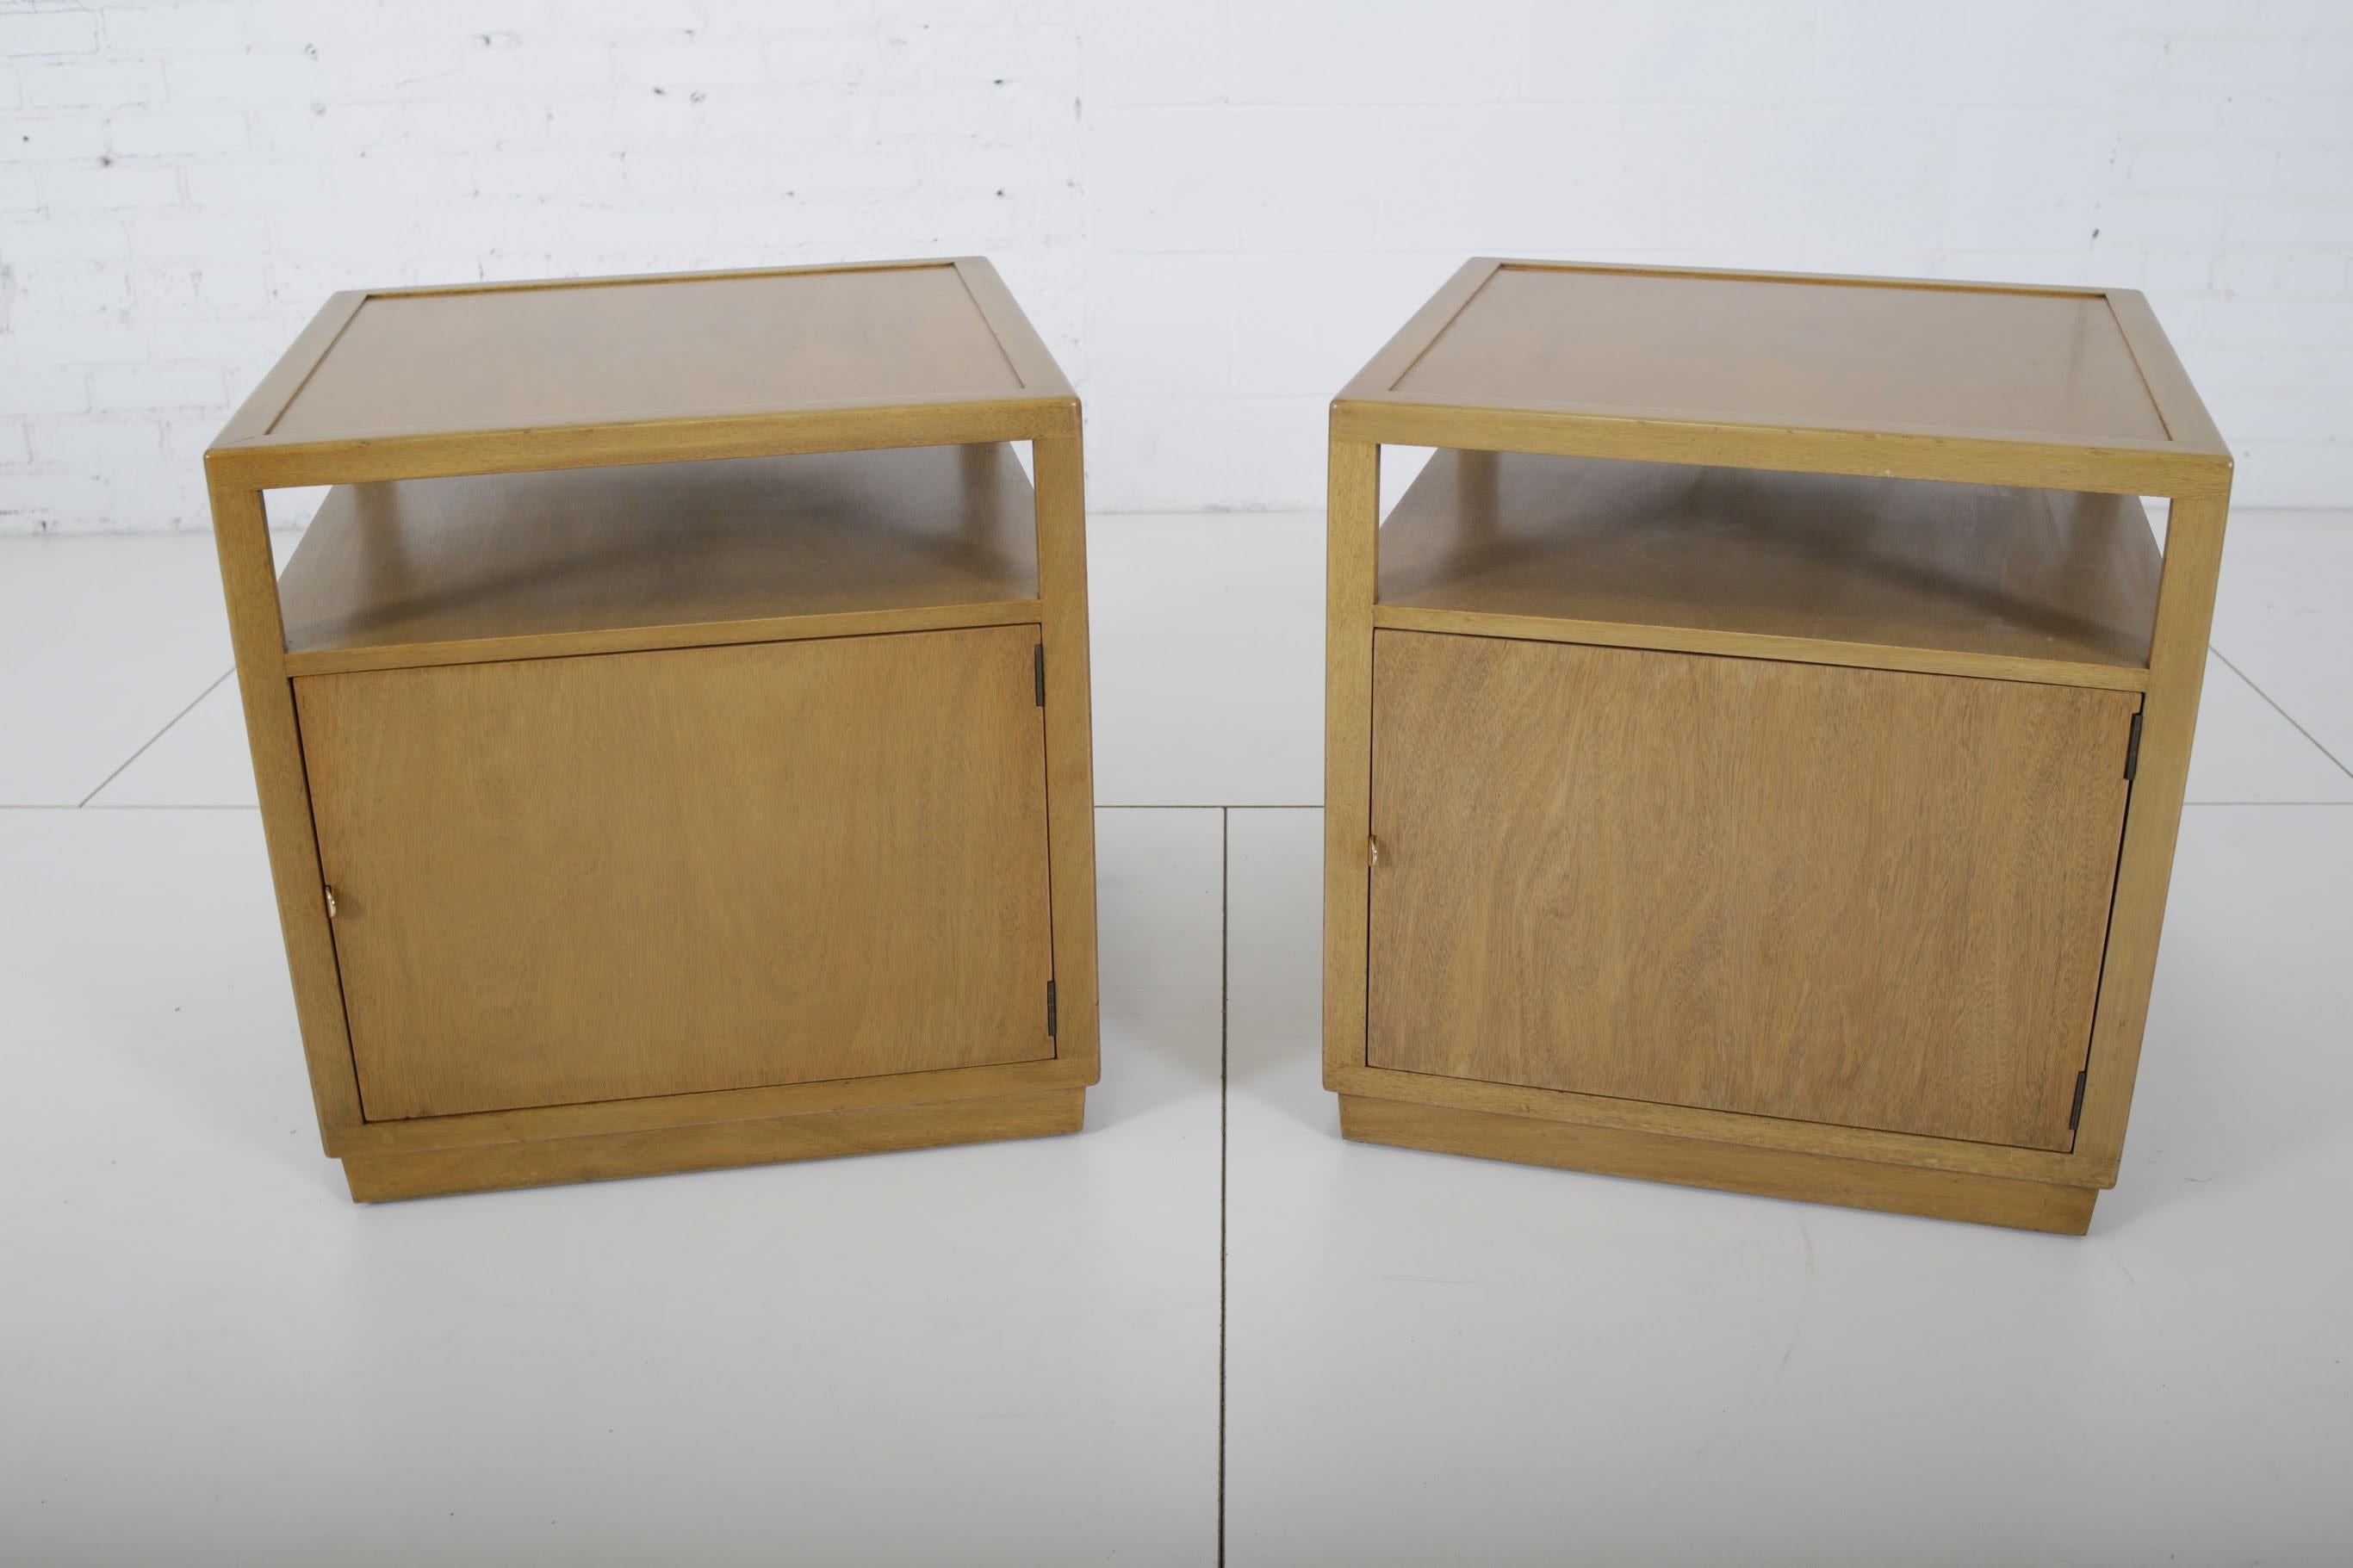 Pair of end table/nightstands by Edward Wormley for Dunbar. Fully restored. Both have a single shelf with storage cabinet below.